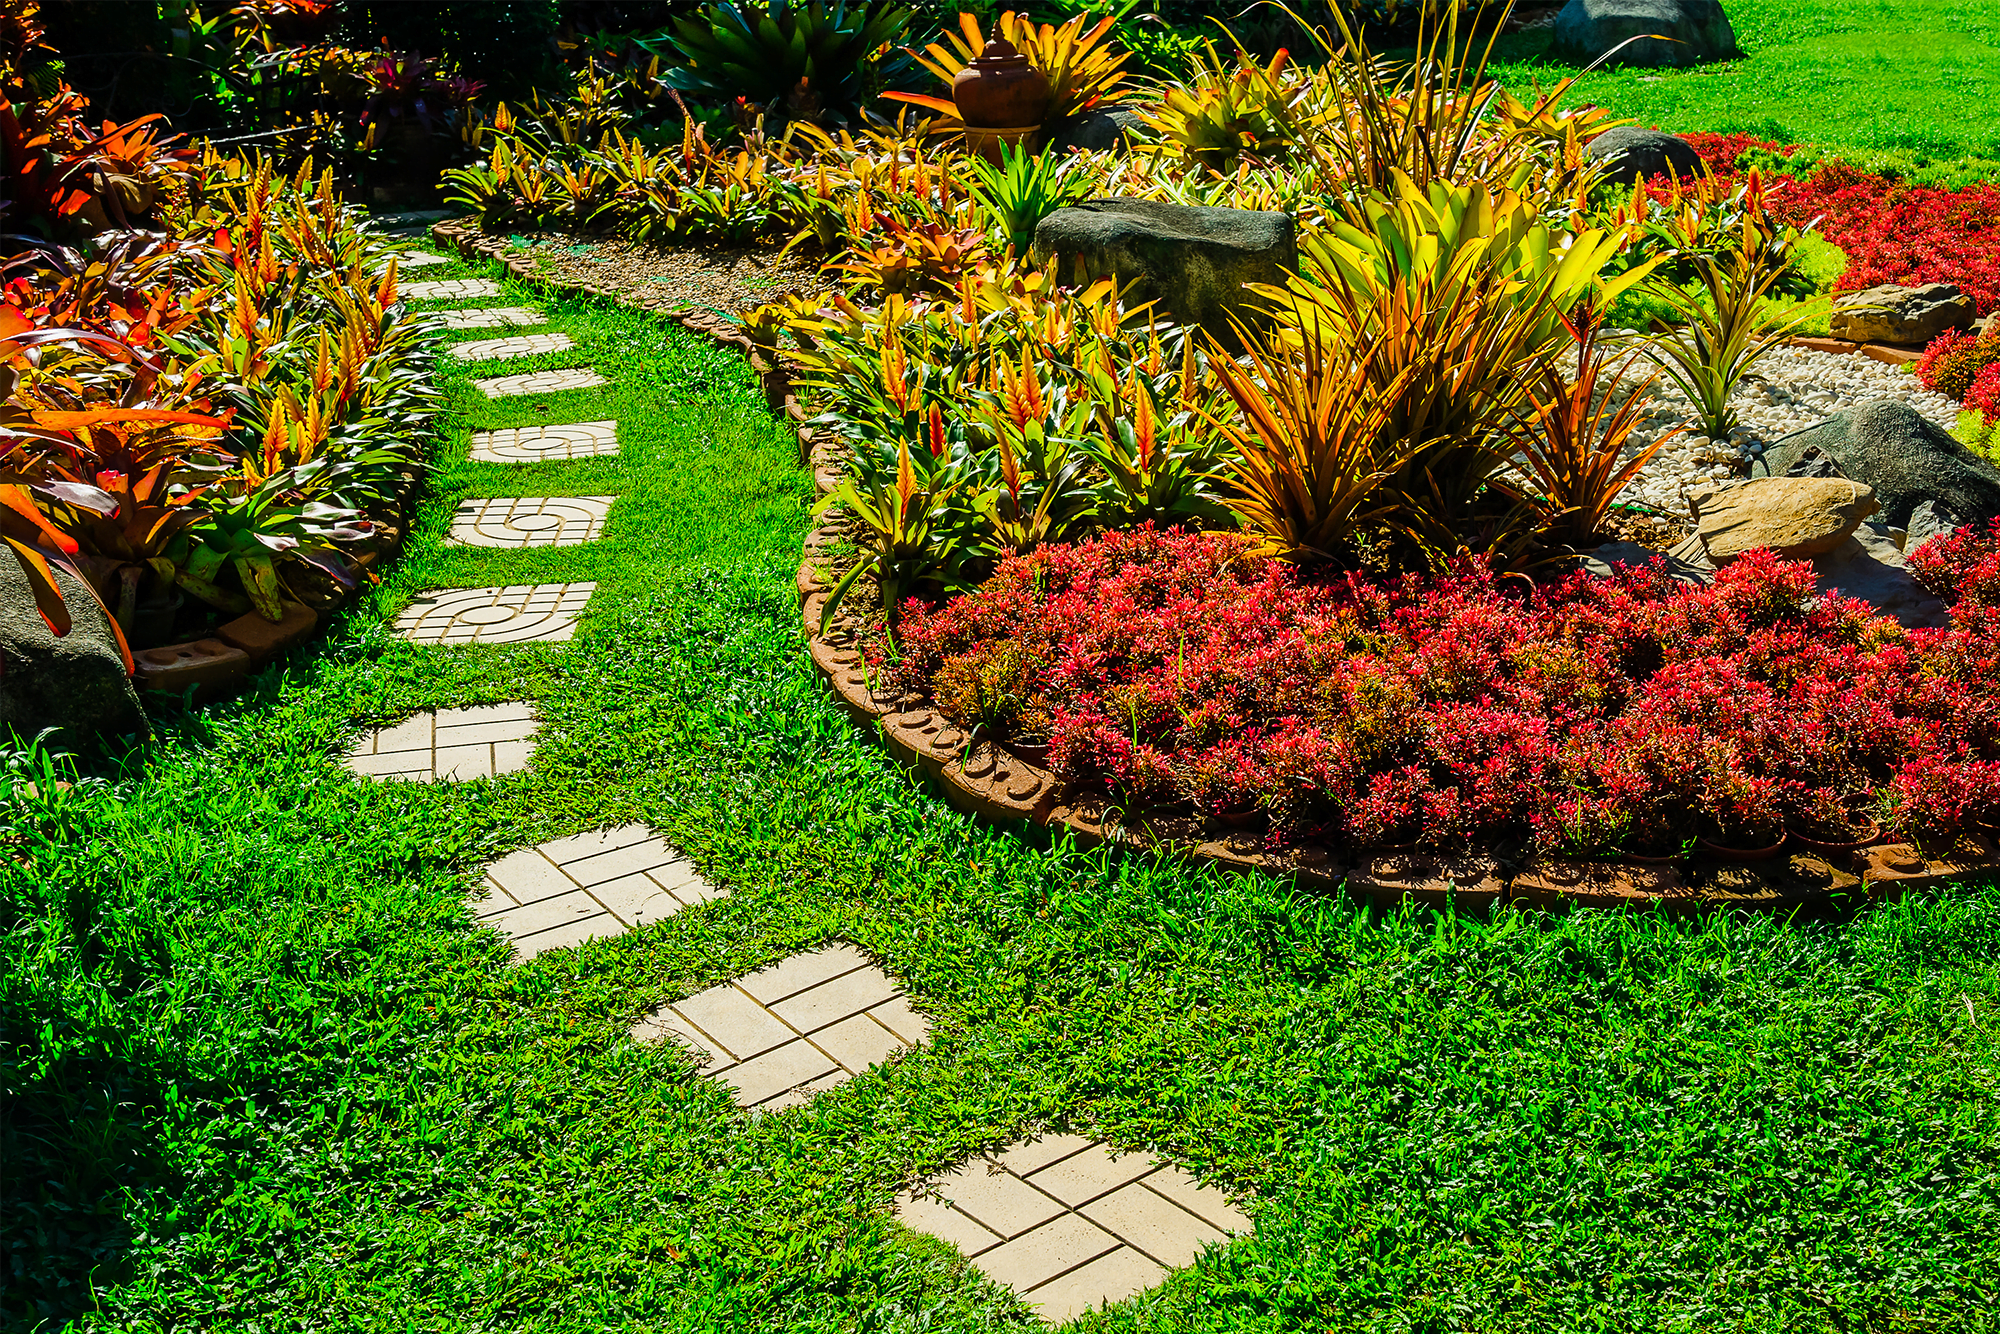 garden with colorful plants and pathway made of bricks